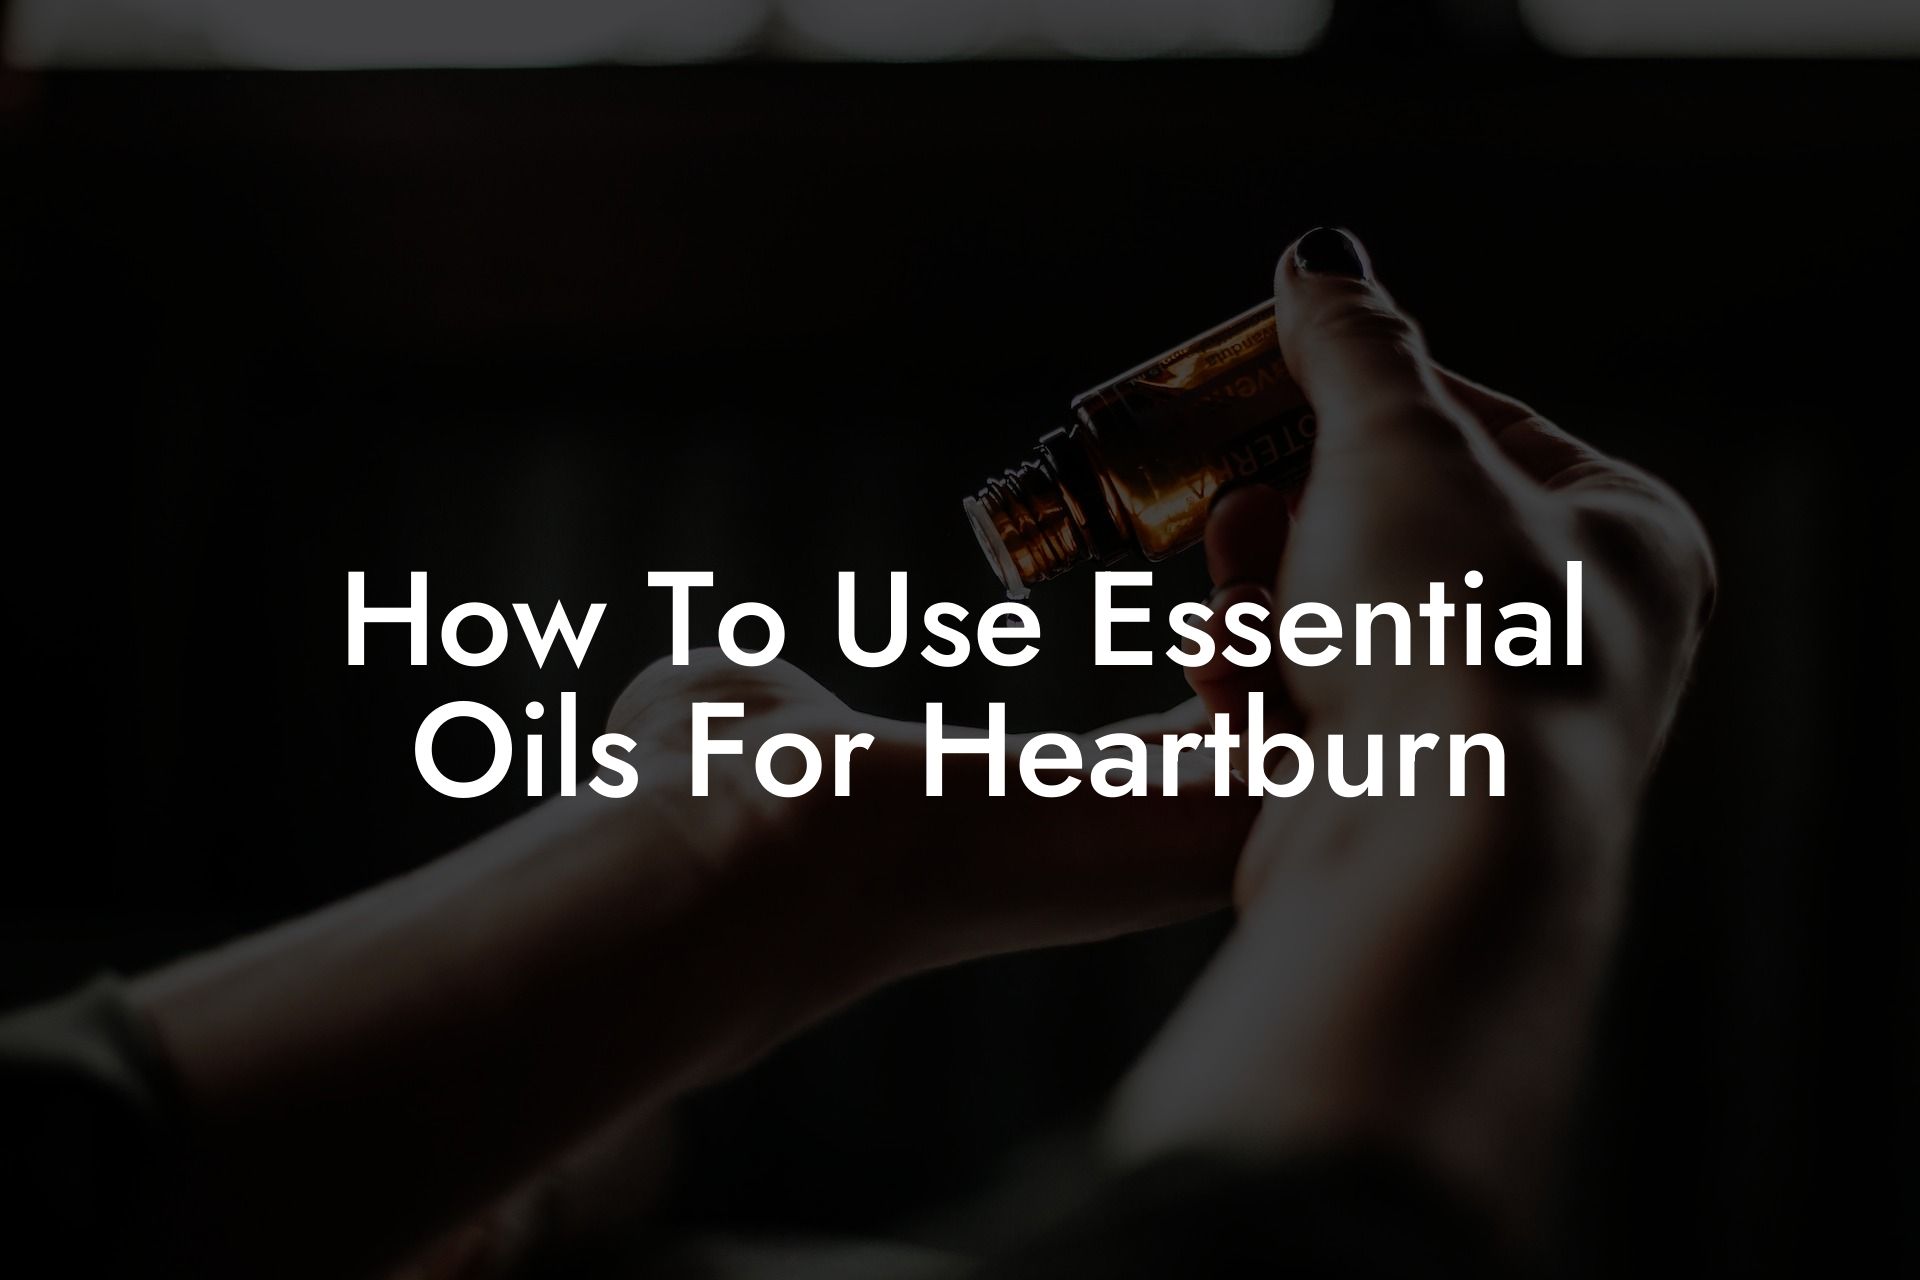 How To Use Essential Oils For Heartburn